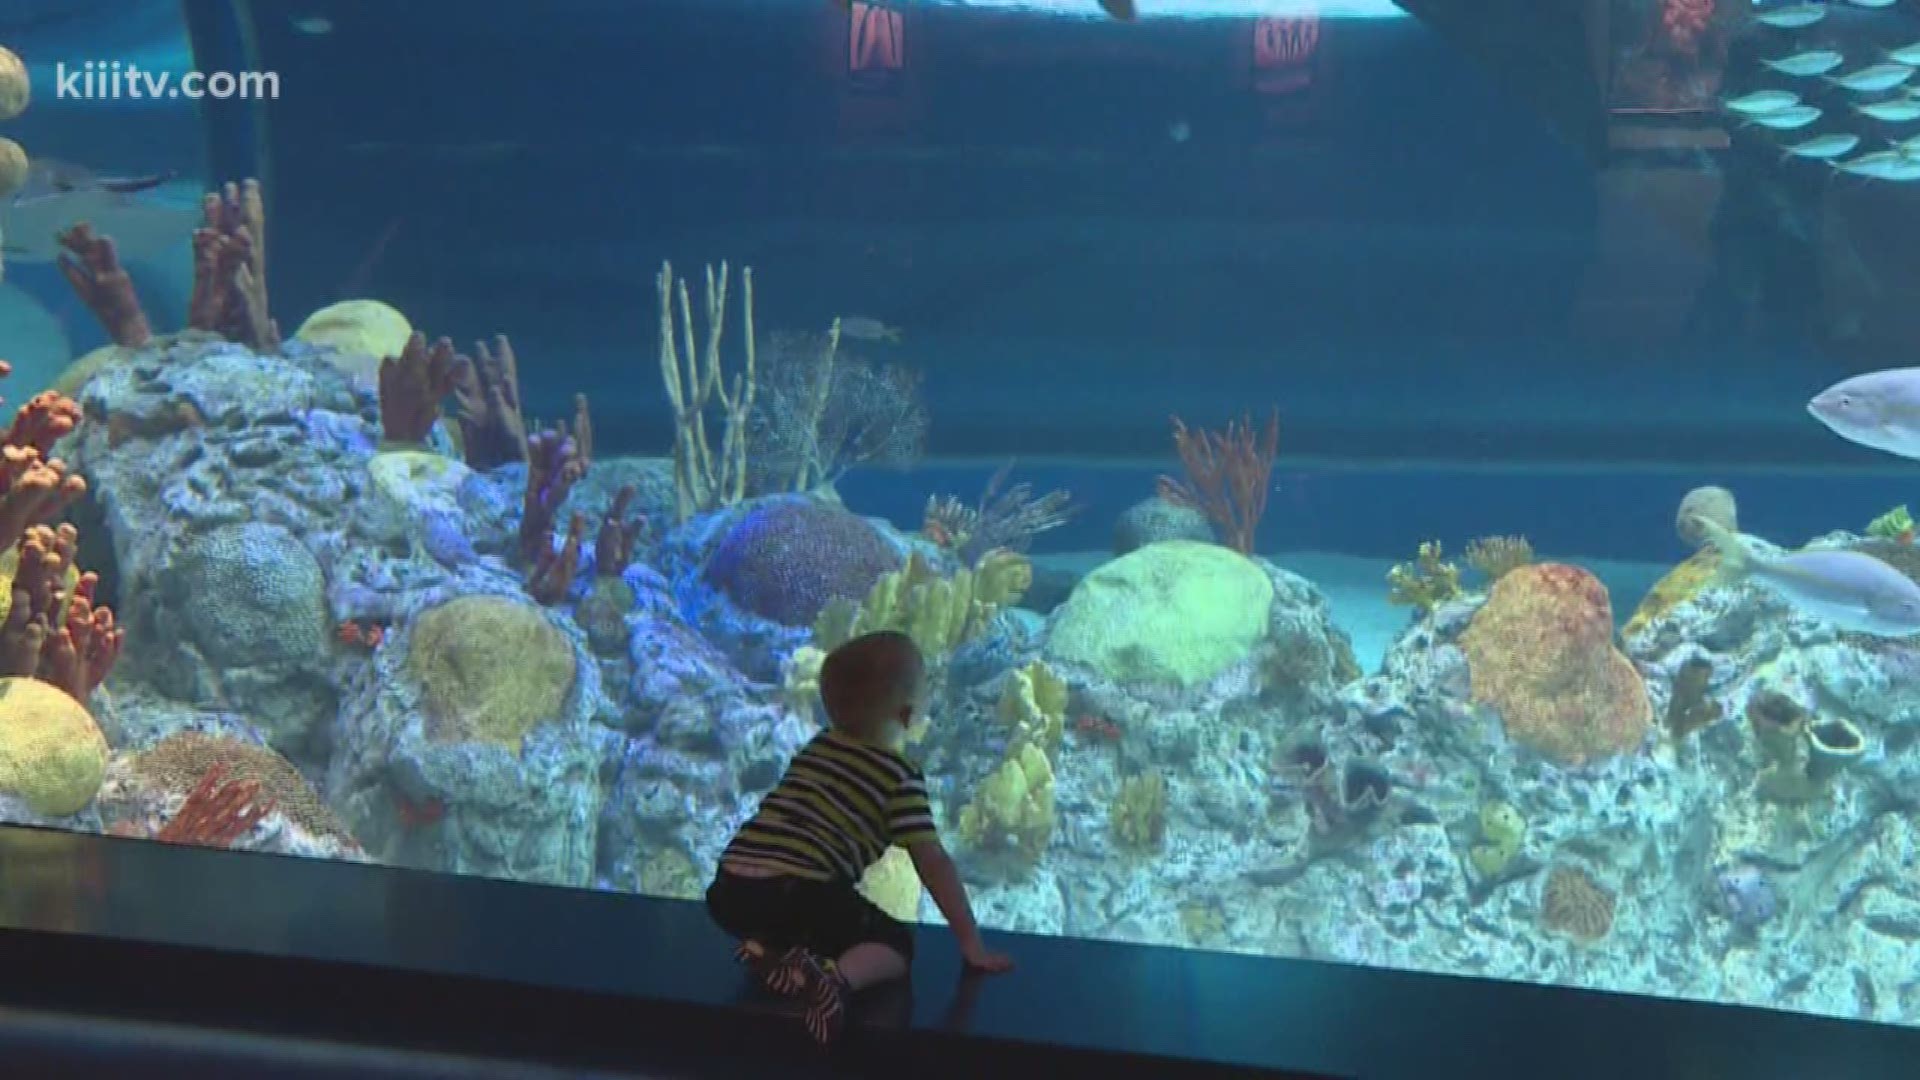 People with autism were able to comfortably enjoy the exhibits Sunday morning at the Texas State Aquarium.